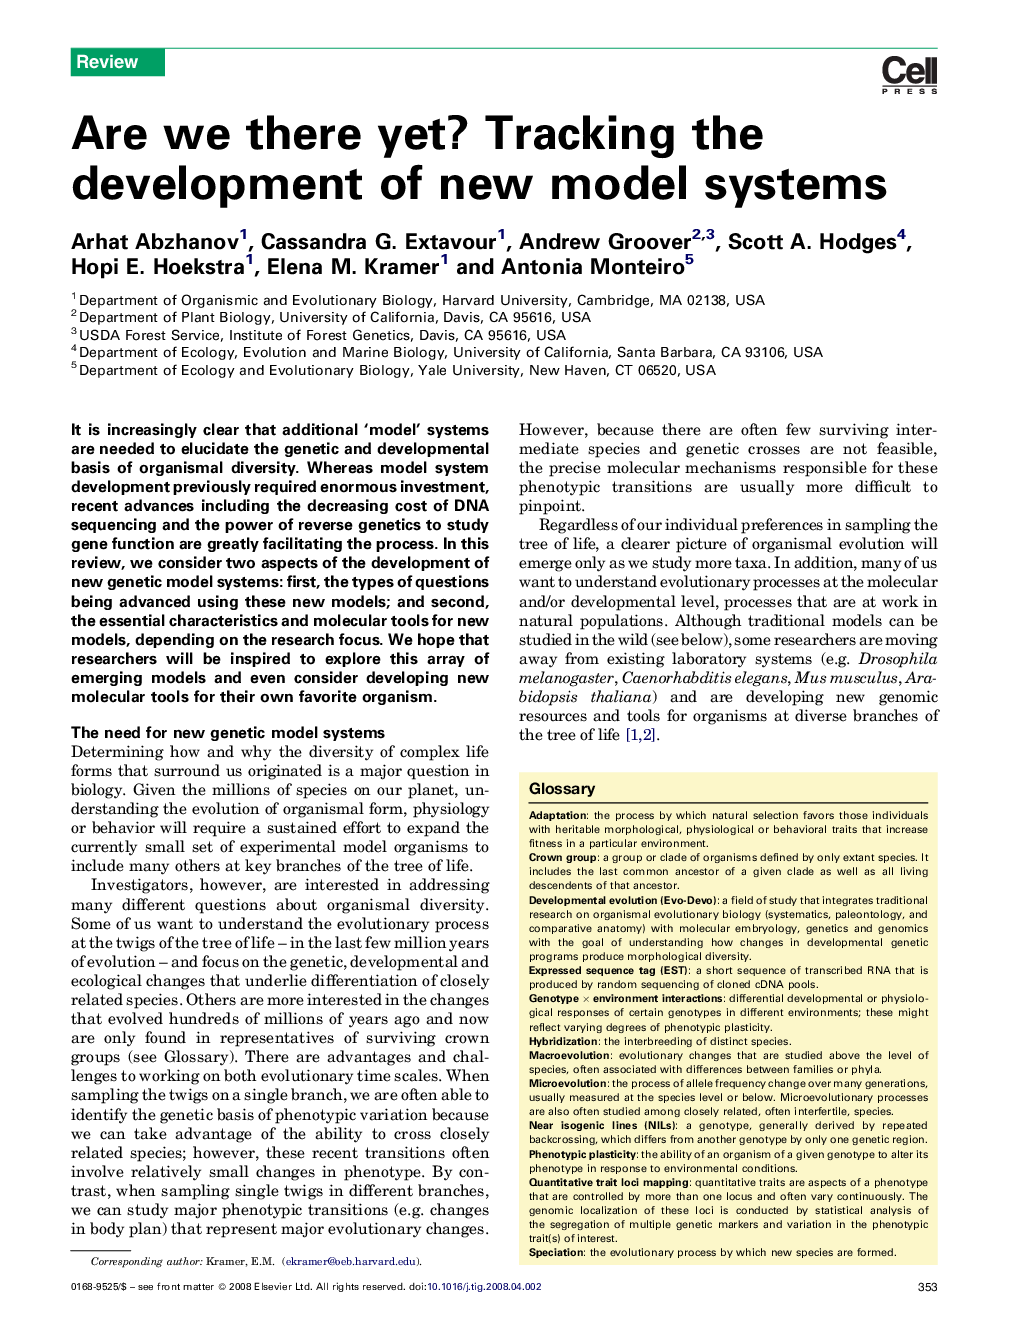 Are we there yet? Tracking the development of new model systems